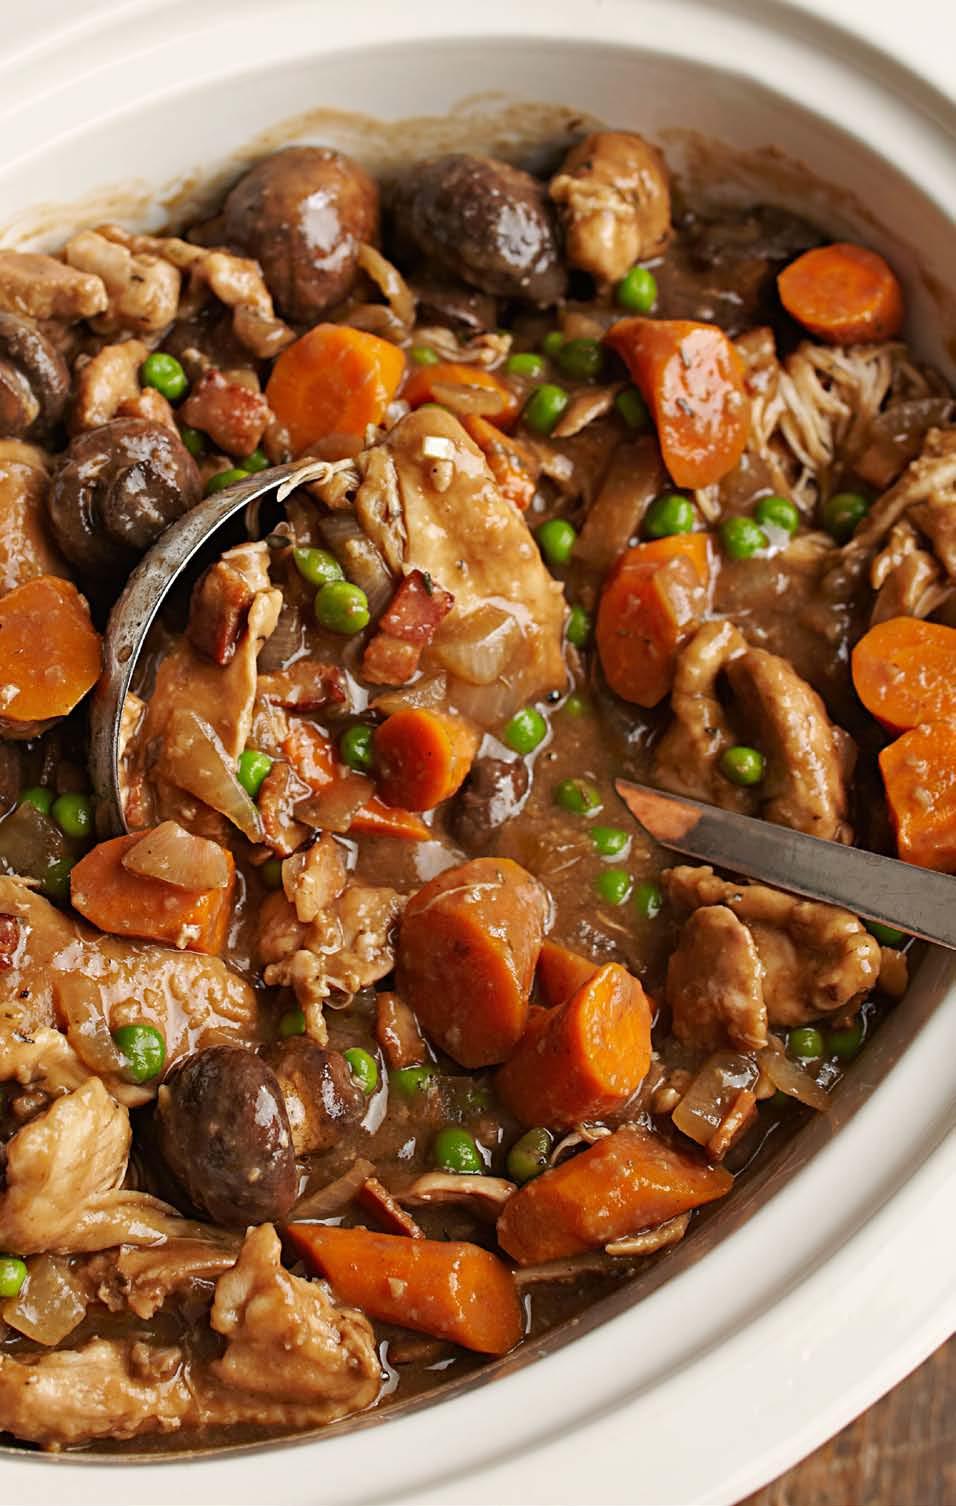 Slow-Cooker Stout & Chicken Stew Makes: 8 servings, about 11/3 cups each Active time: 45 minutes Slow-cooker time: 4-8 hours To prep ahead: Trim chicken, chop bacon; prep onion and garlic; defrost